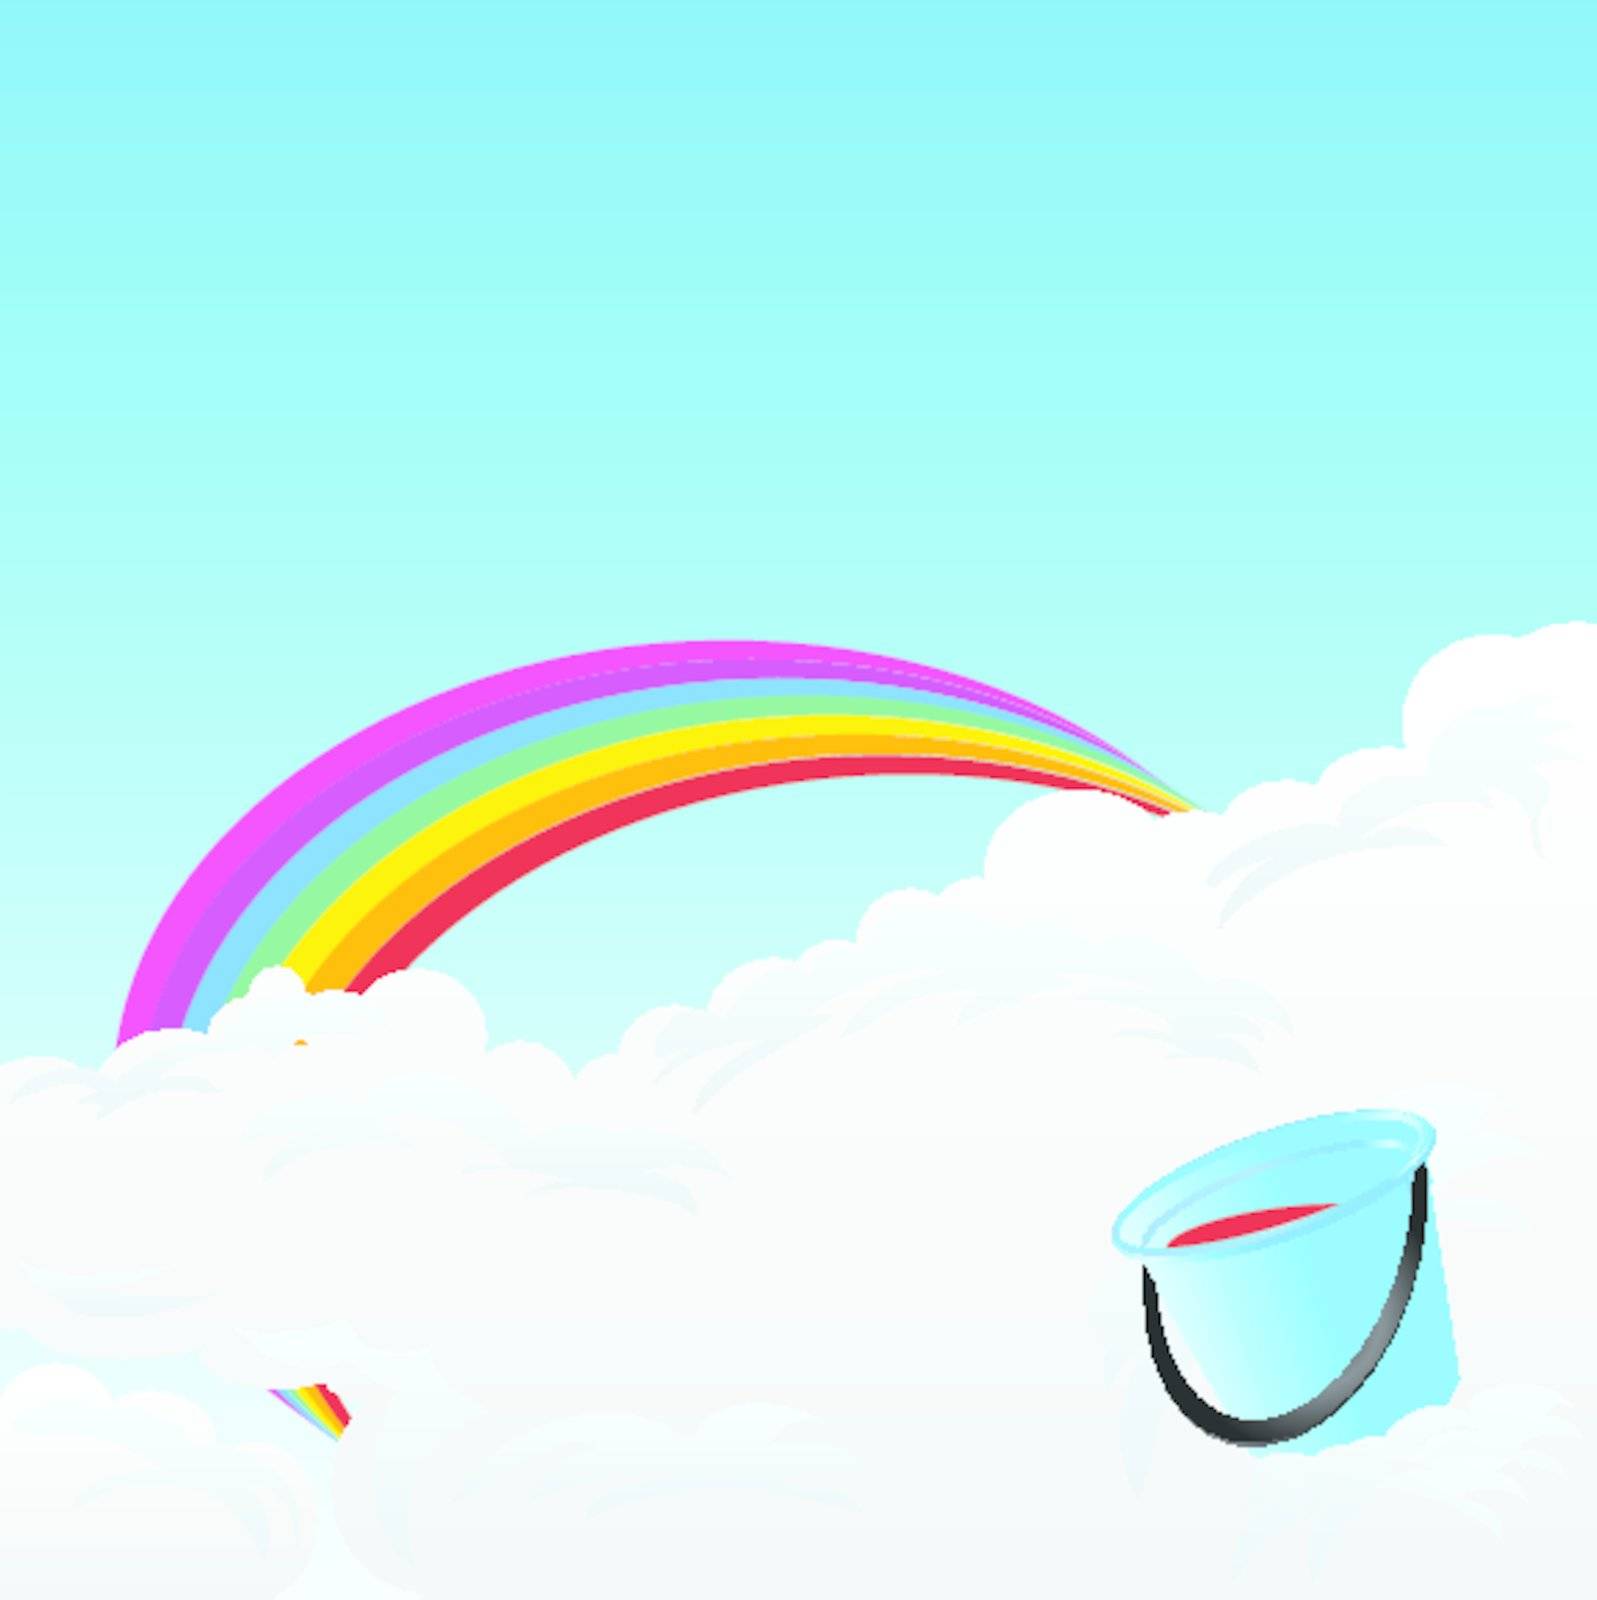 Rainbow in the clouds and a bucket of red paint. Vector illustration.